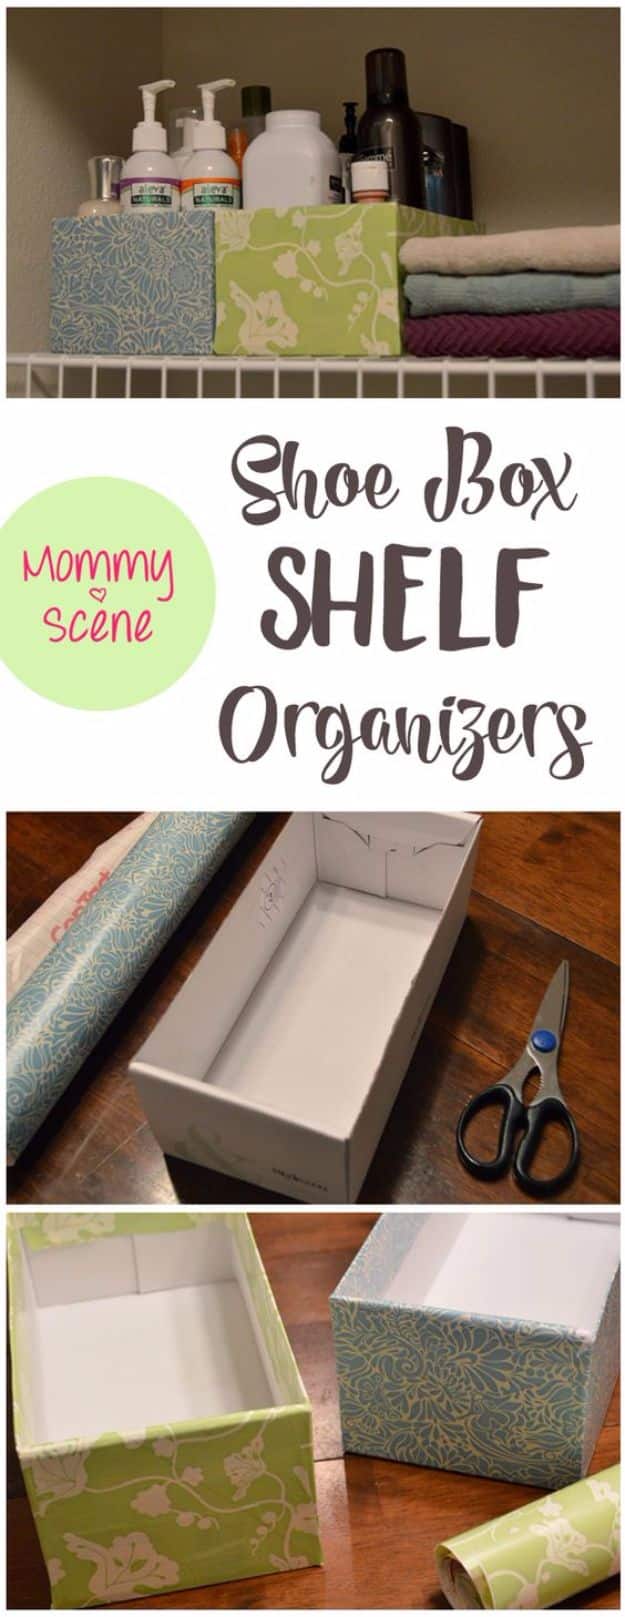 DIY Ideas With Shoe Boxes - Shoe Box Shelf Organizer - Shoe Box Crafts and Organizers for Storage - How To Make A Shelf, Makeup Organizer, Kids Room Decoration, Storage Ideas Projects - Cheap Home Decor DIY Ideas for Kids, Adults and Teens Rooms #diyideas #upcycle